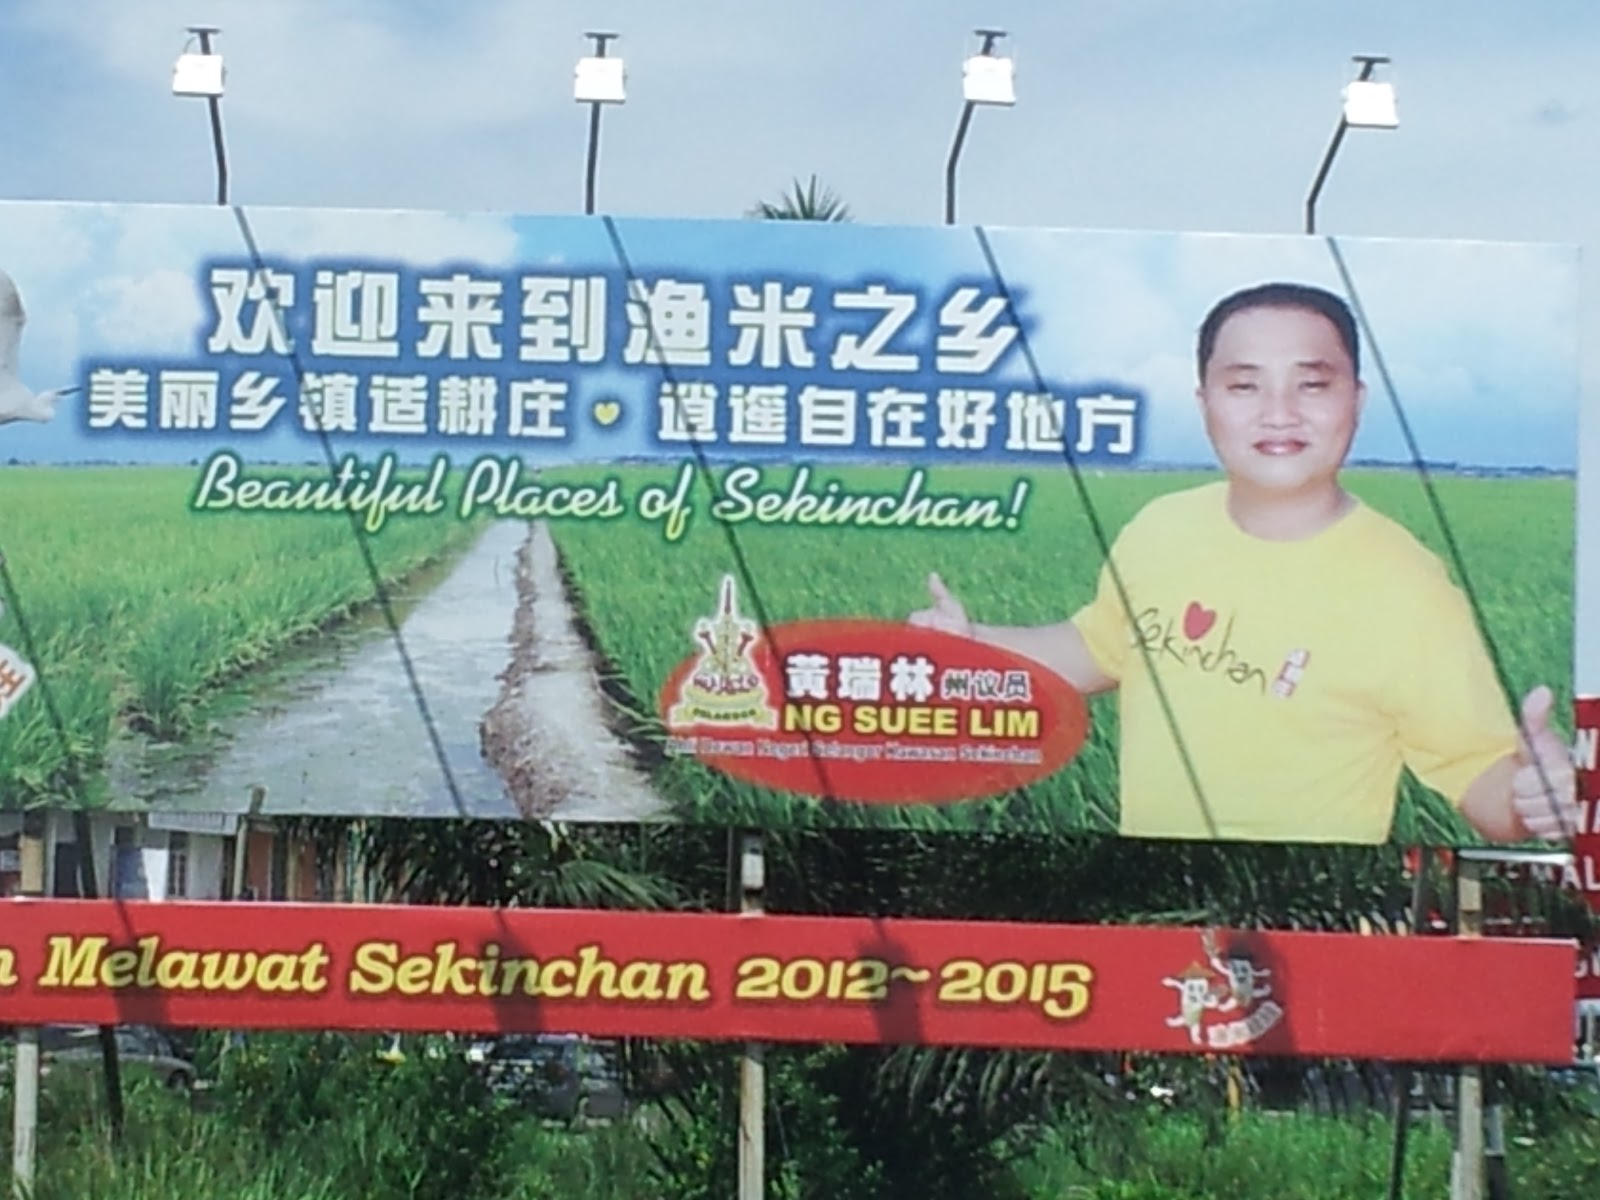 One of the many billboards with Sekinchan ADUN Ng Swee Lim on it.